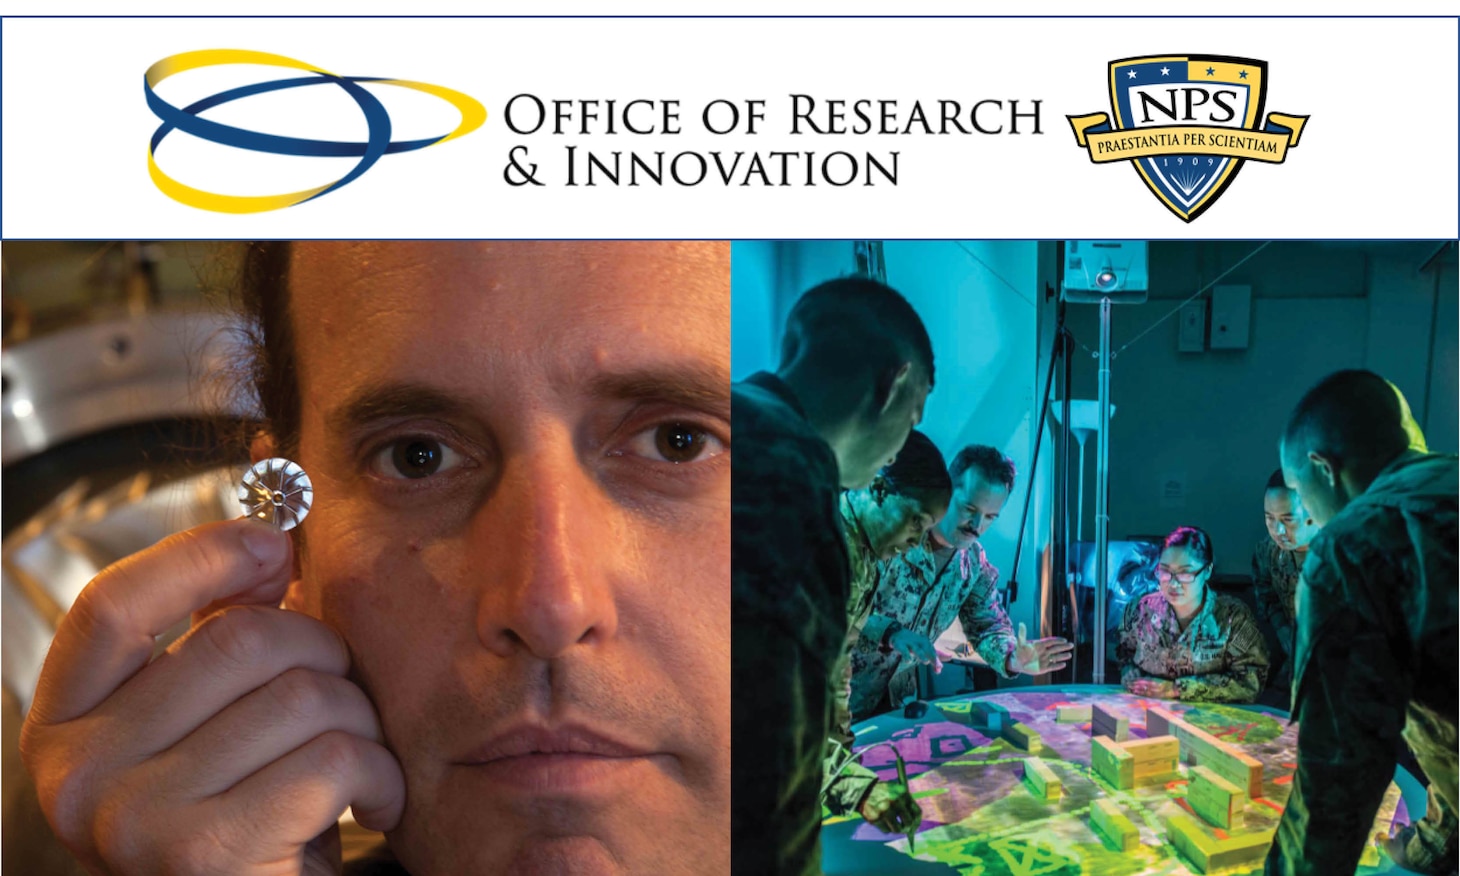 The Naval Postgraduate School (NPS) has established the new Office of Research and Innovation (OR&I) in order to empower the work of faculty members like Anthony Gannon, an associate professor in the school’s Department of Mechanical and Aerospace Engineering, and students such as those conducting modeling and simulation research. OR&I was created by NPS in response to higher Department of Defense and Navy guidance for greater leadership in technology and innovation that enables our nation’s and military’s strength.